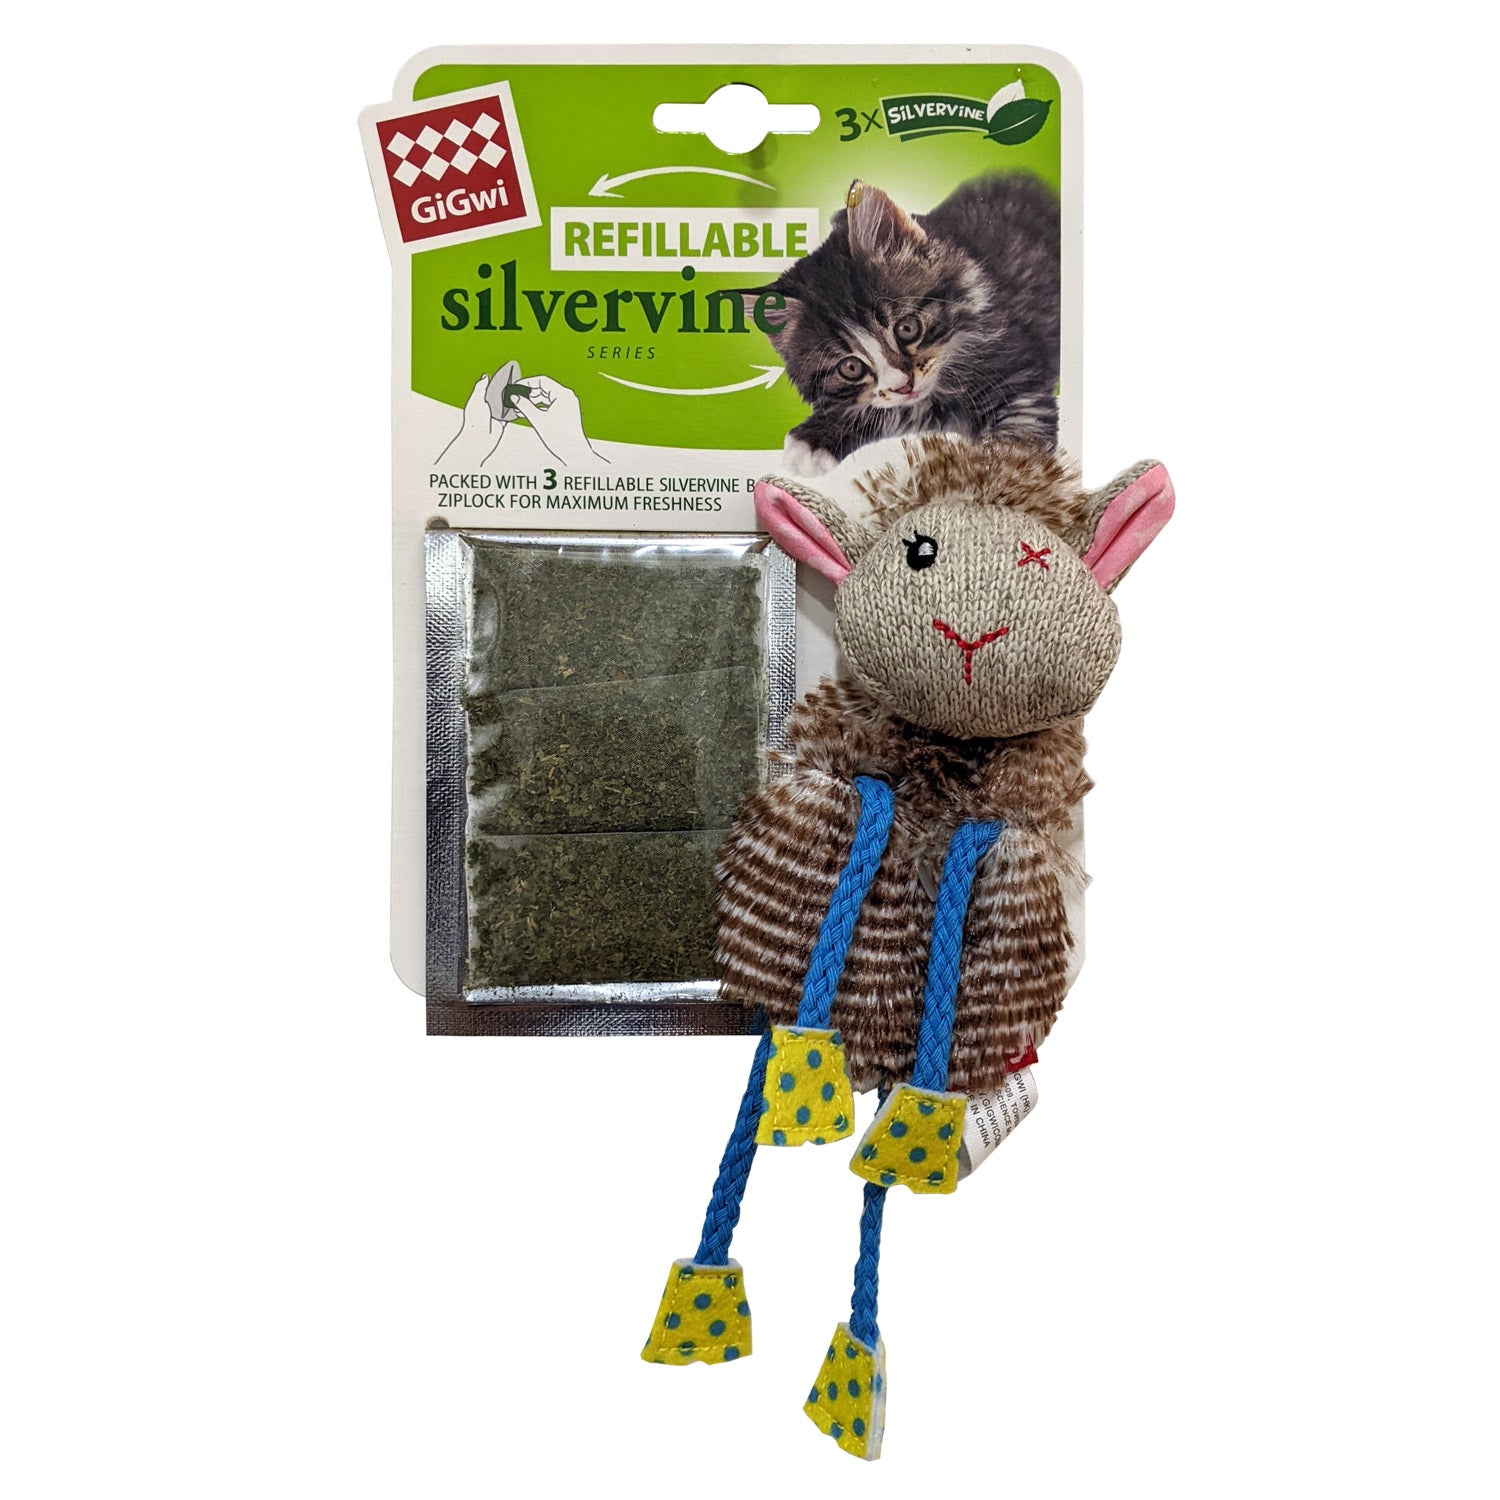 Gigwi Sheep Refillable Slivervine with 3 Slivervine teabags with ziplock bag